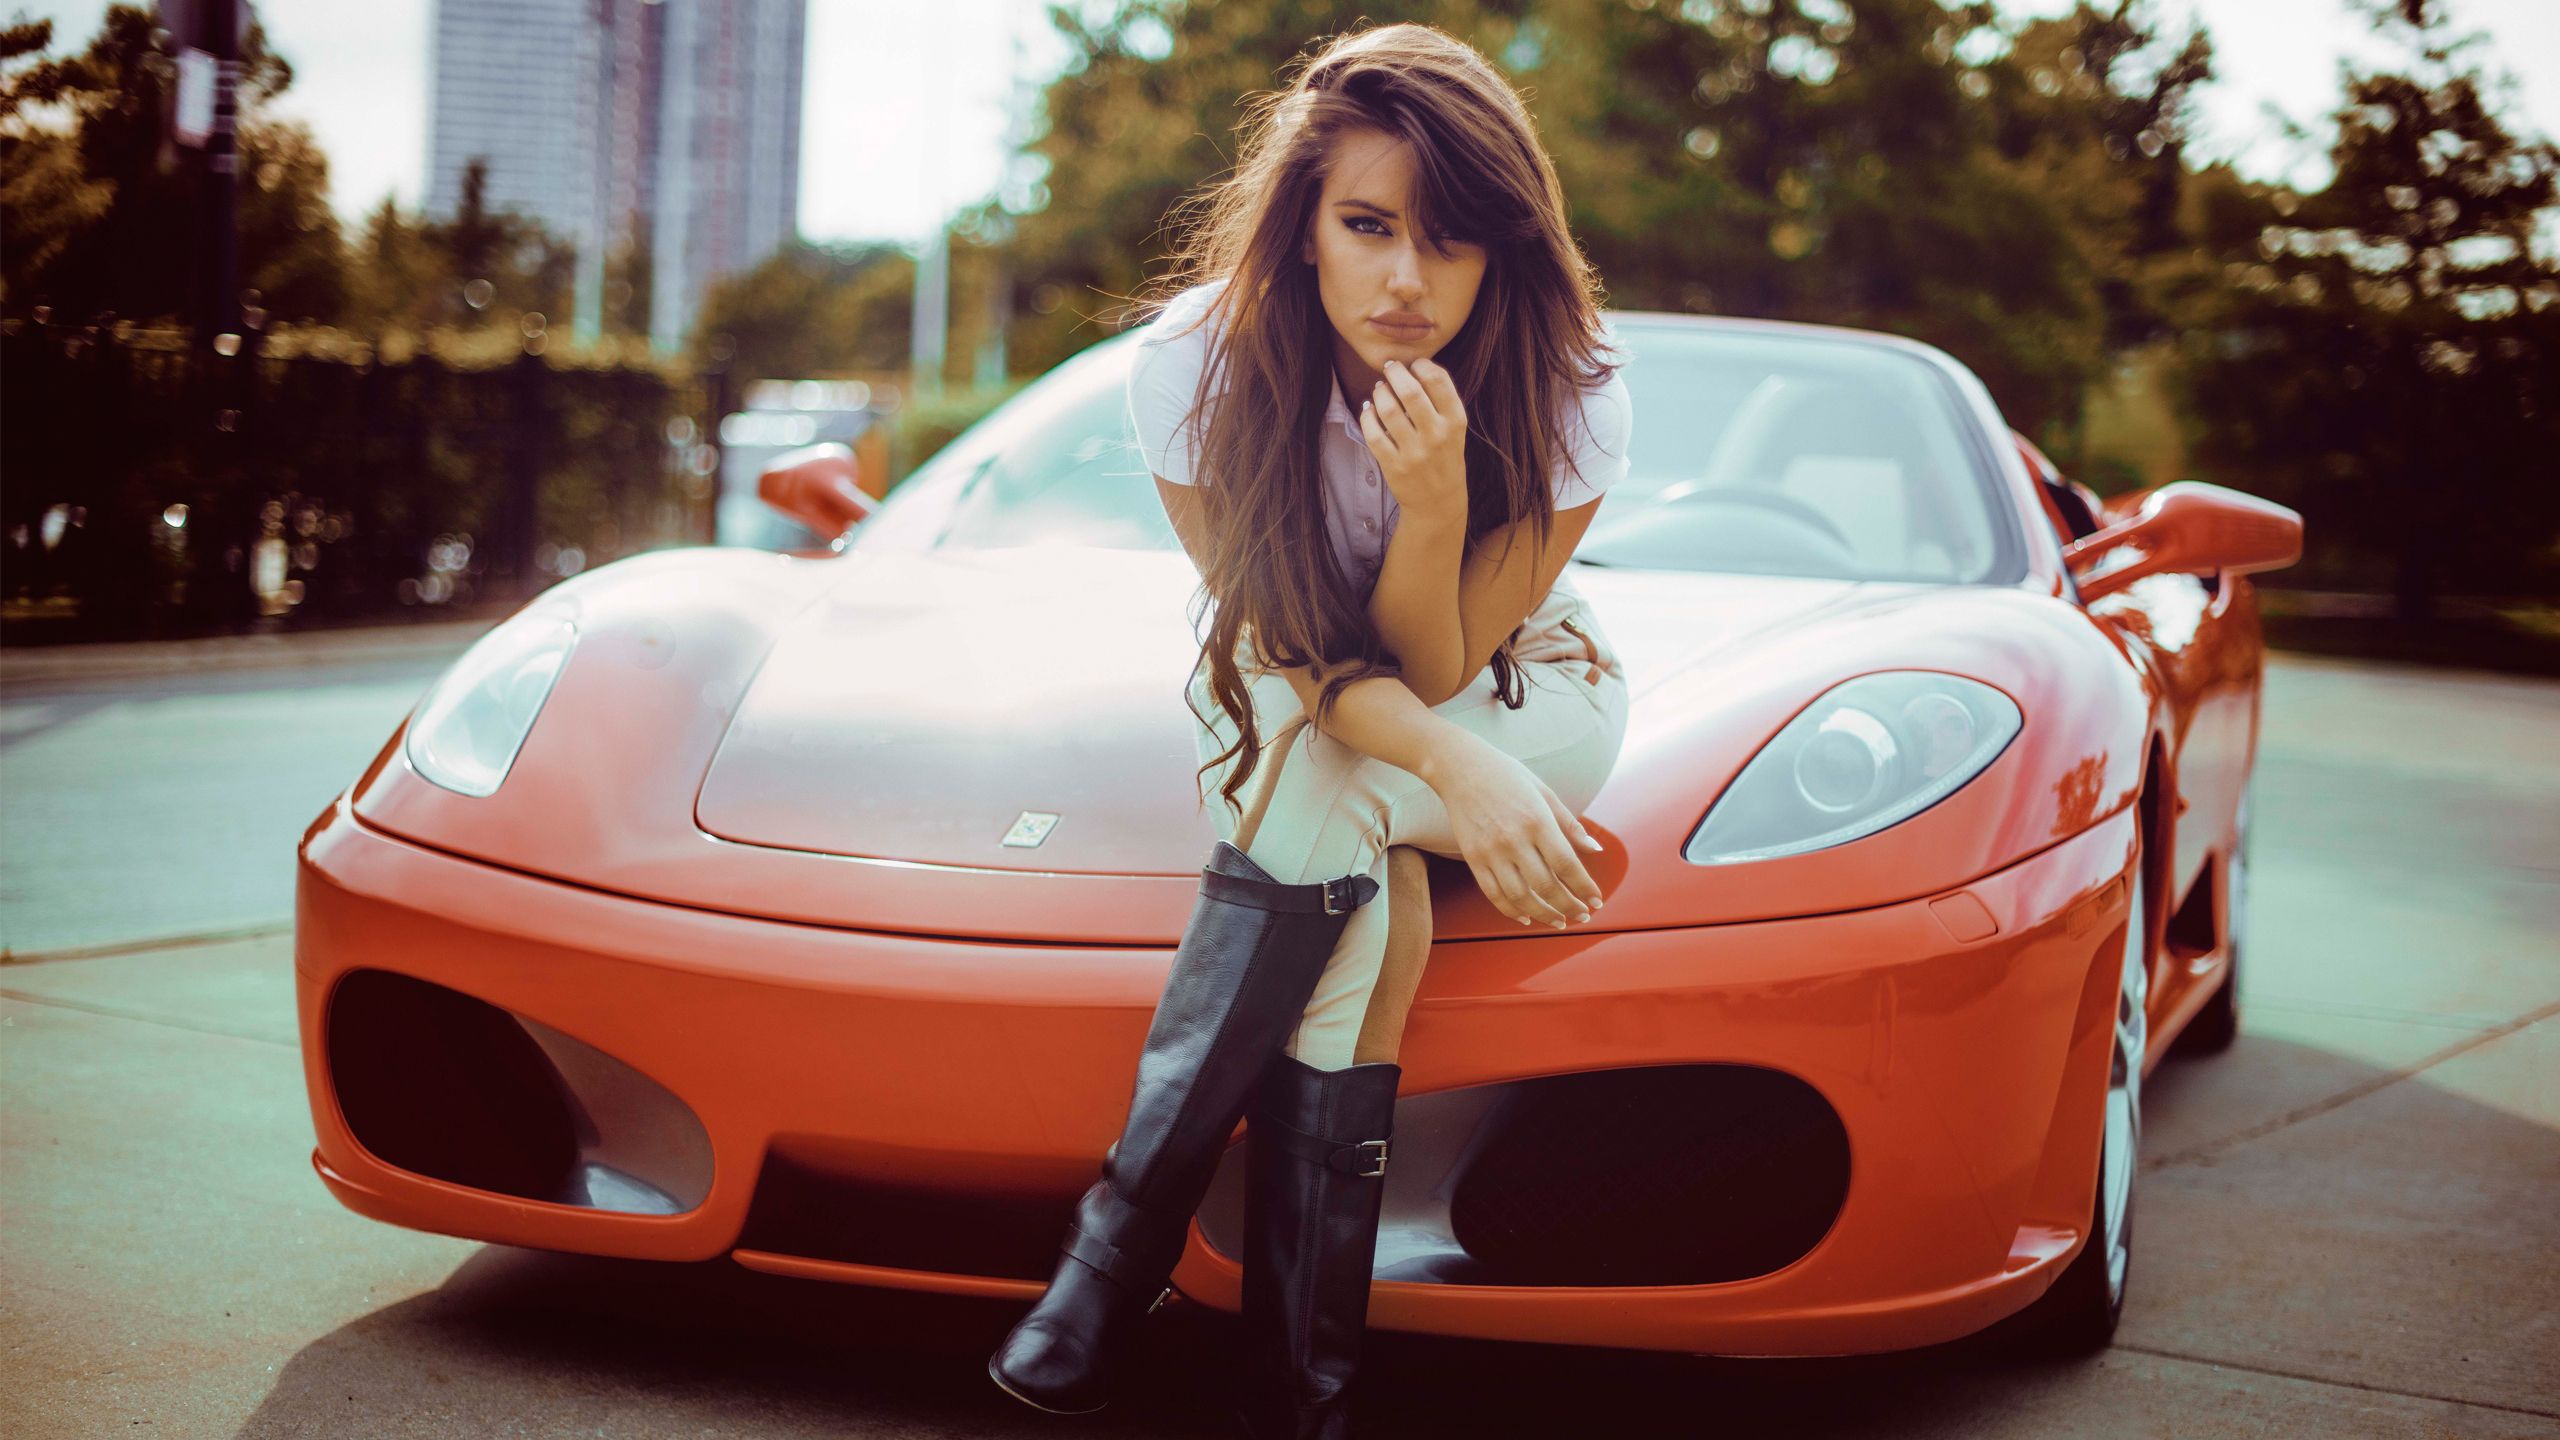 Girl And Car Wallpapers - Wallpaper Cave